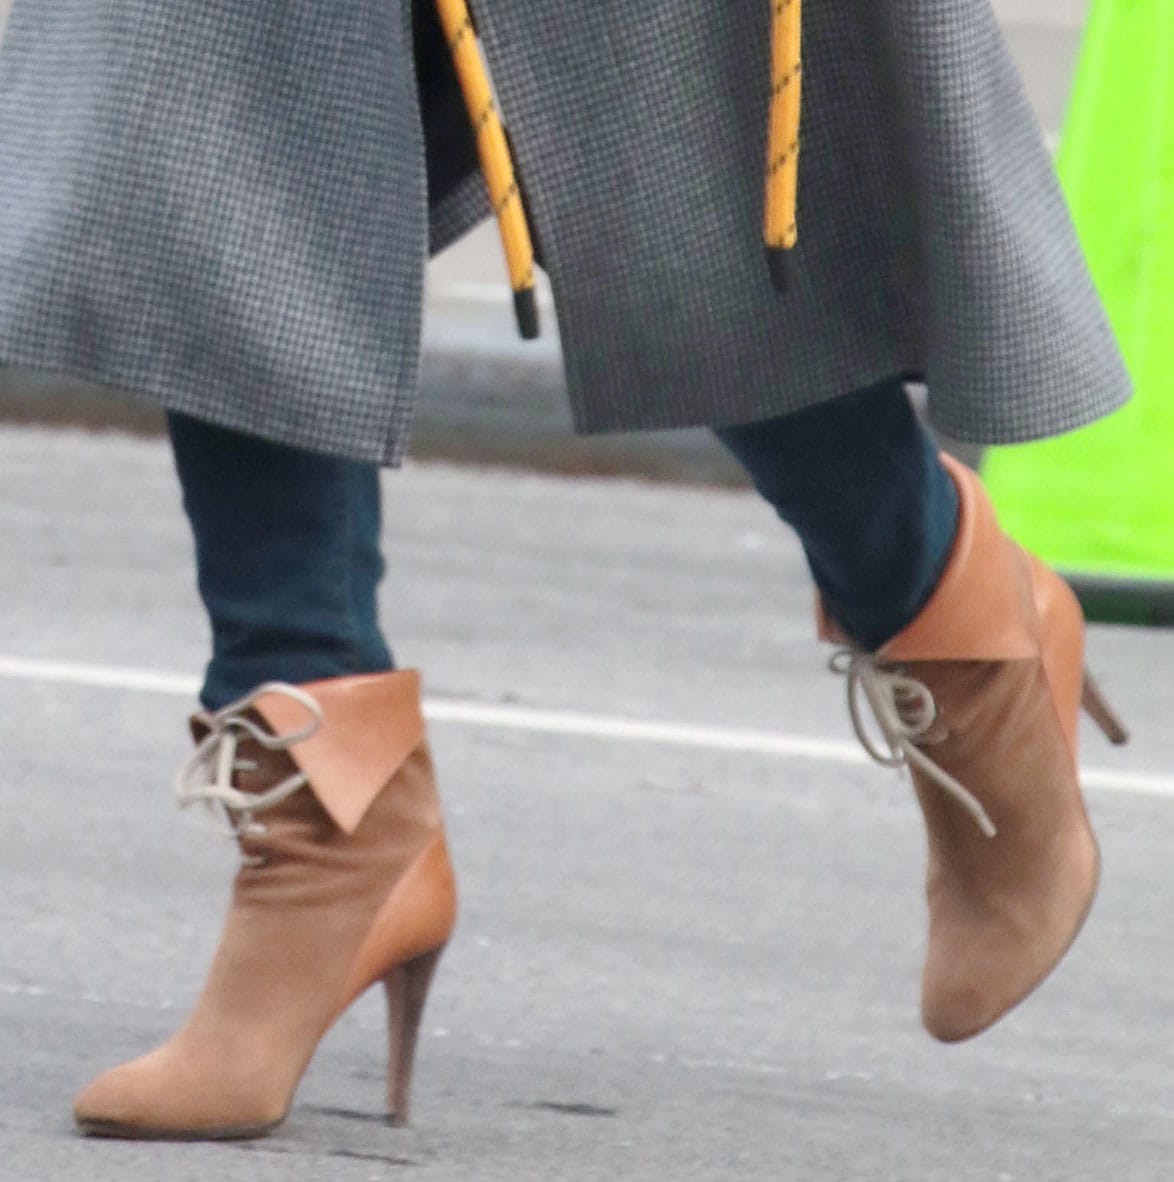 Nicky Hilton completes her chic maternity winter look with Chloe Catlyn ankle boots